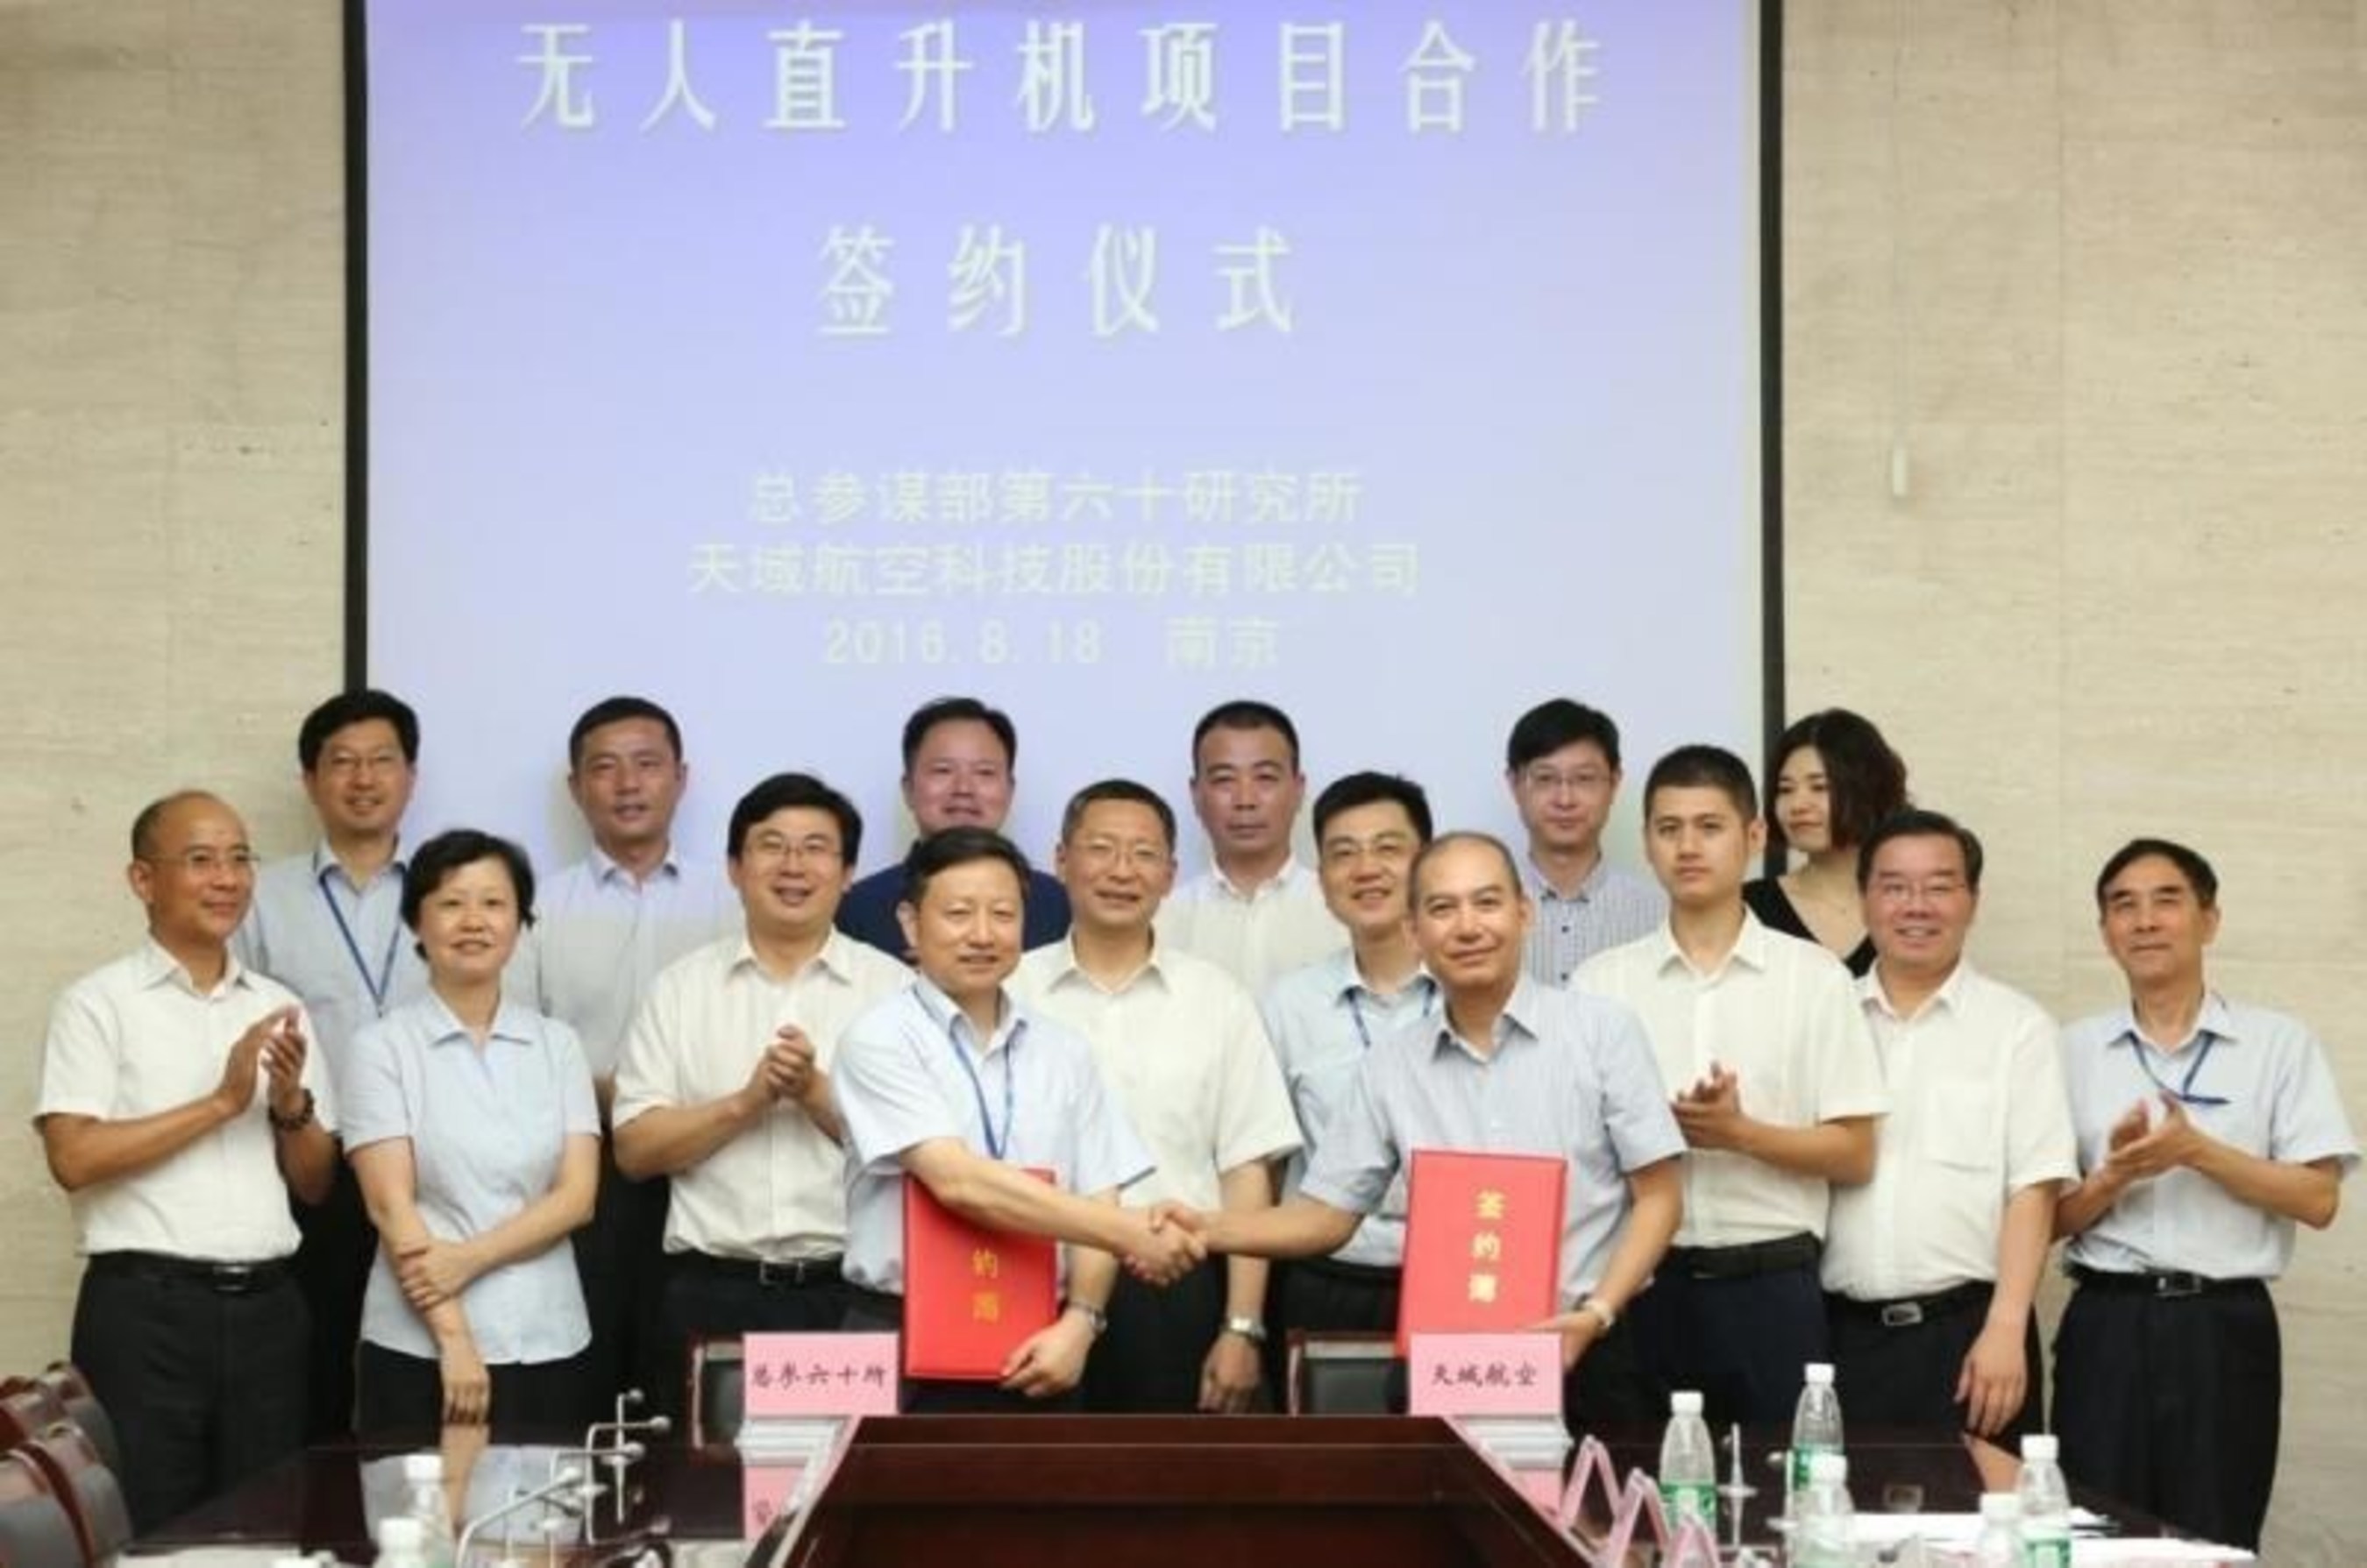 Jiangsu Tianyu Aviation Technology Co., Ltd. and the 60th Research Institute of the General Staff Department of the Chinese People's Liberation Army inked a cooperation agreement on August 18